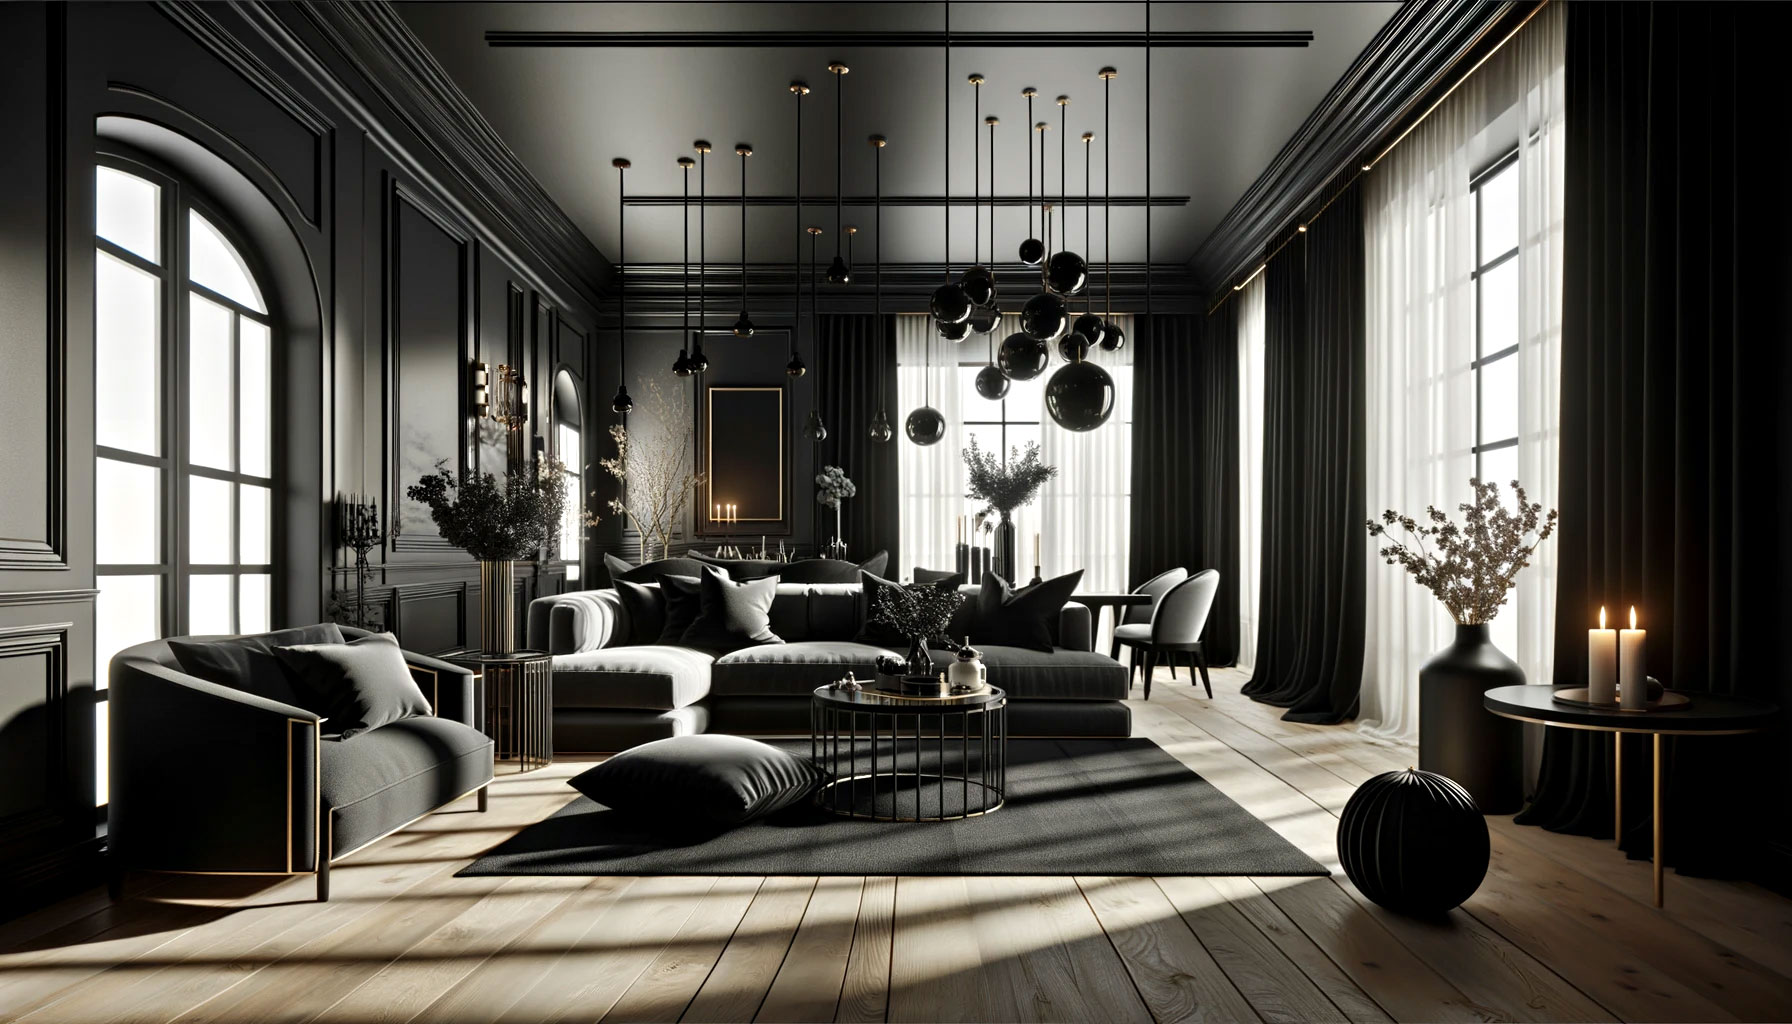 The Colour Psychology of Black in Interior Design